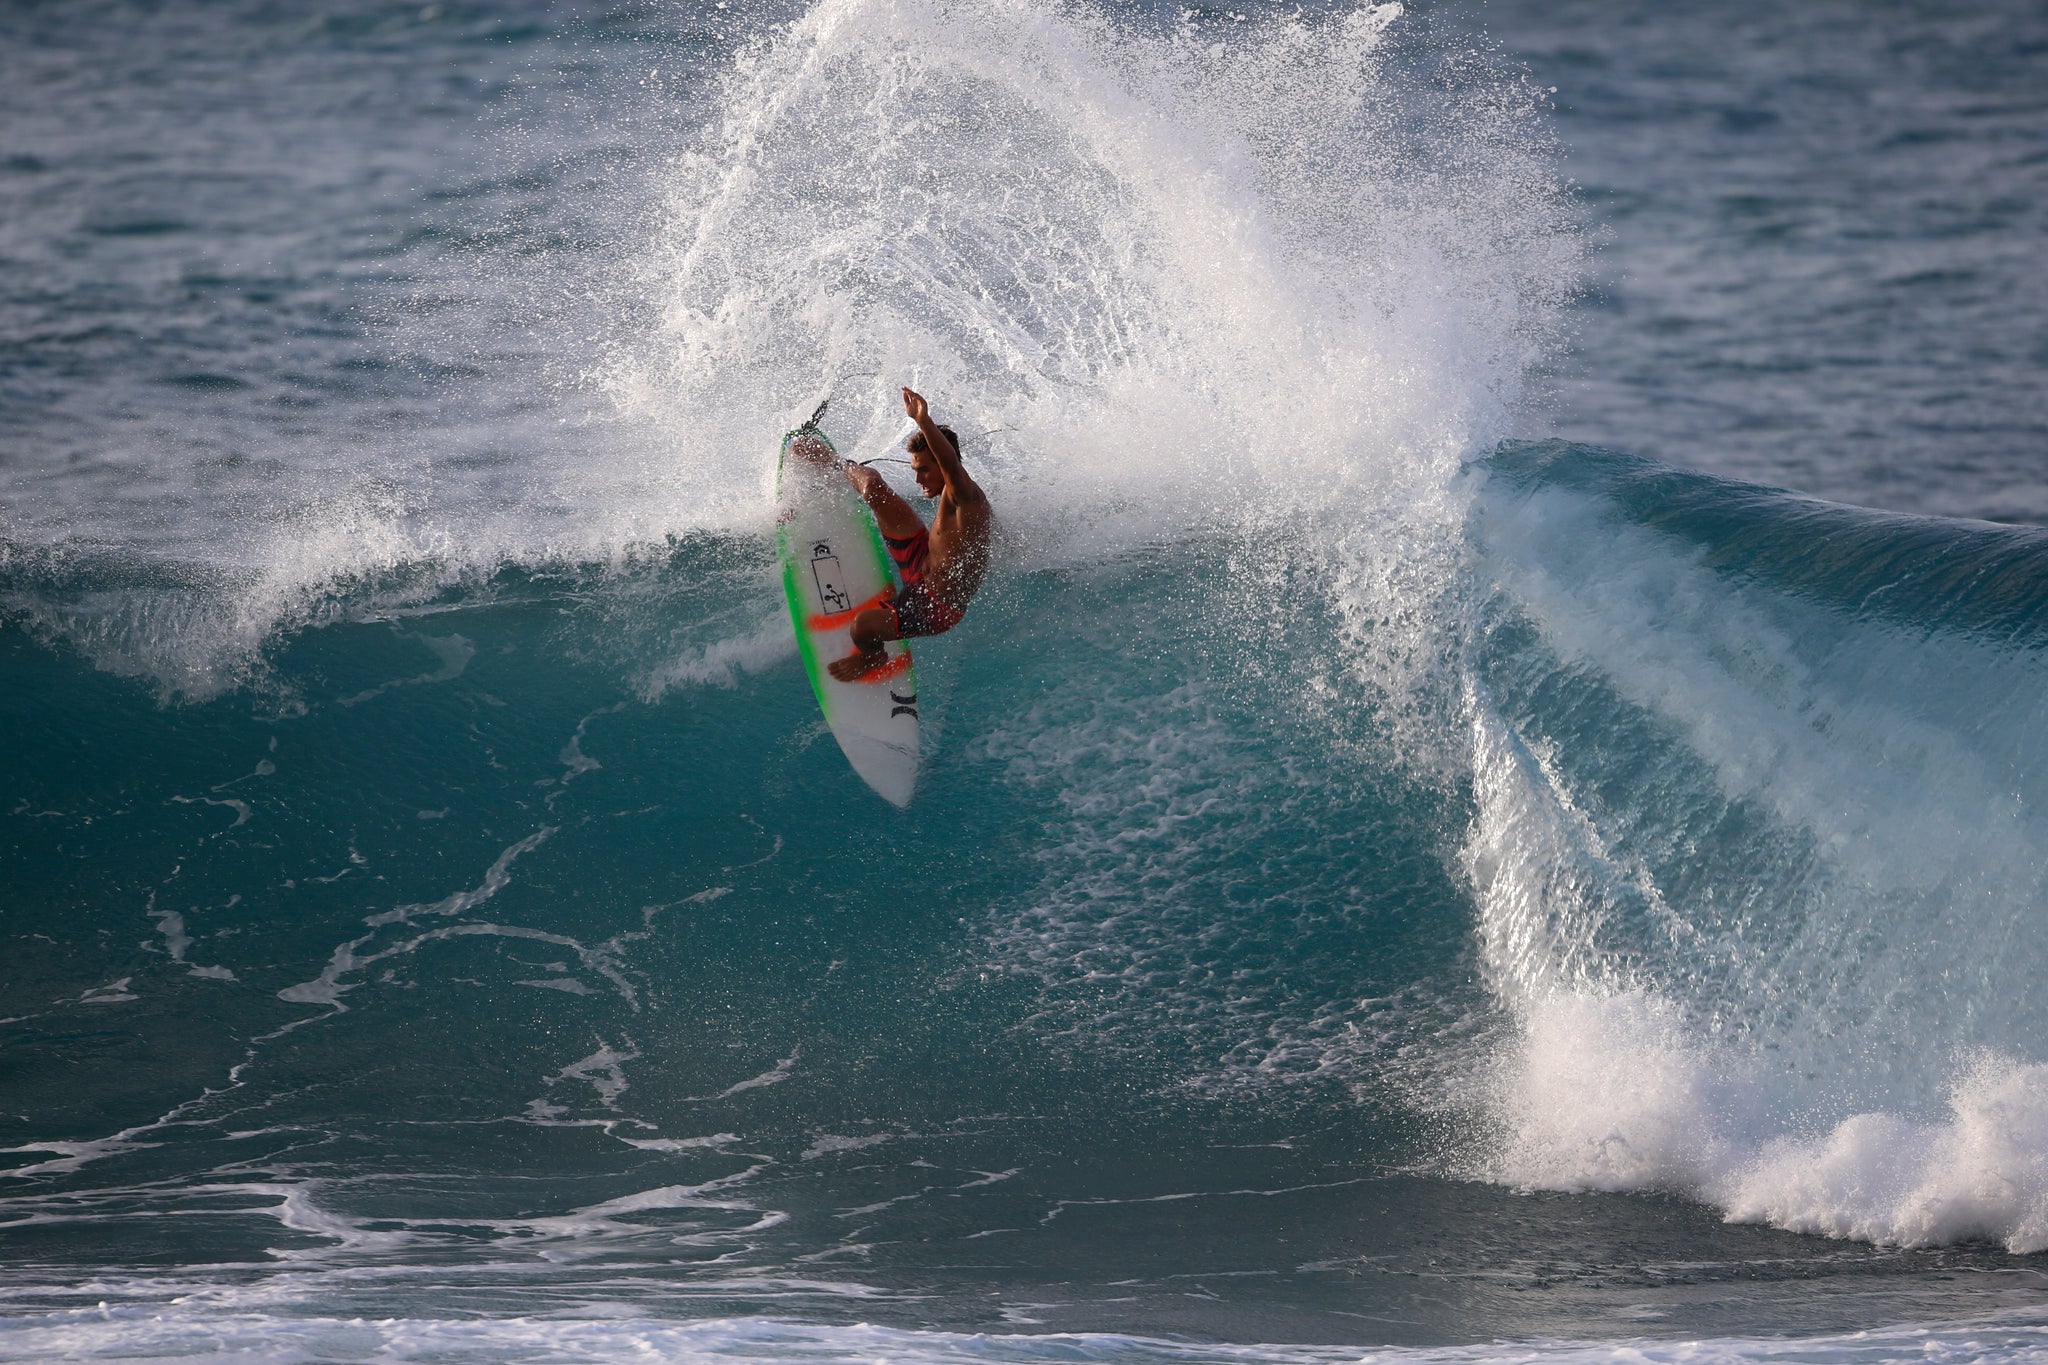 Barron Mamiya on a Chemistry surfboard, surfing at Backdoor Hawaii on his performance surfboard built with Varial foam